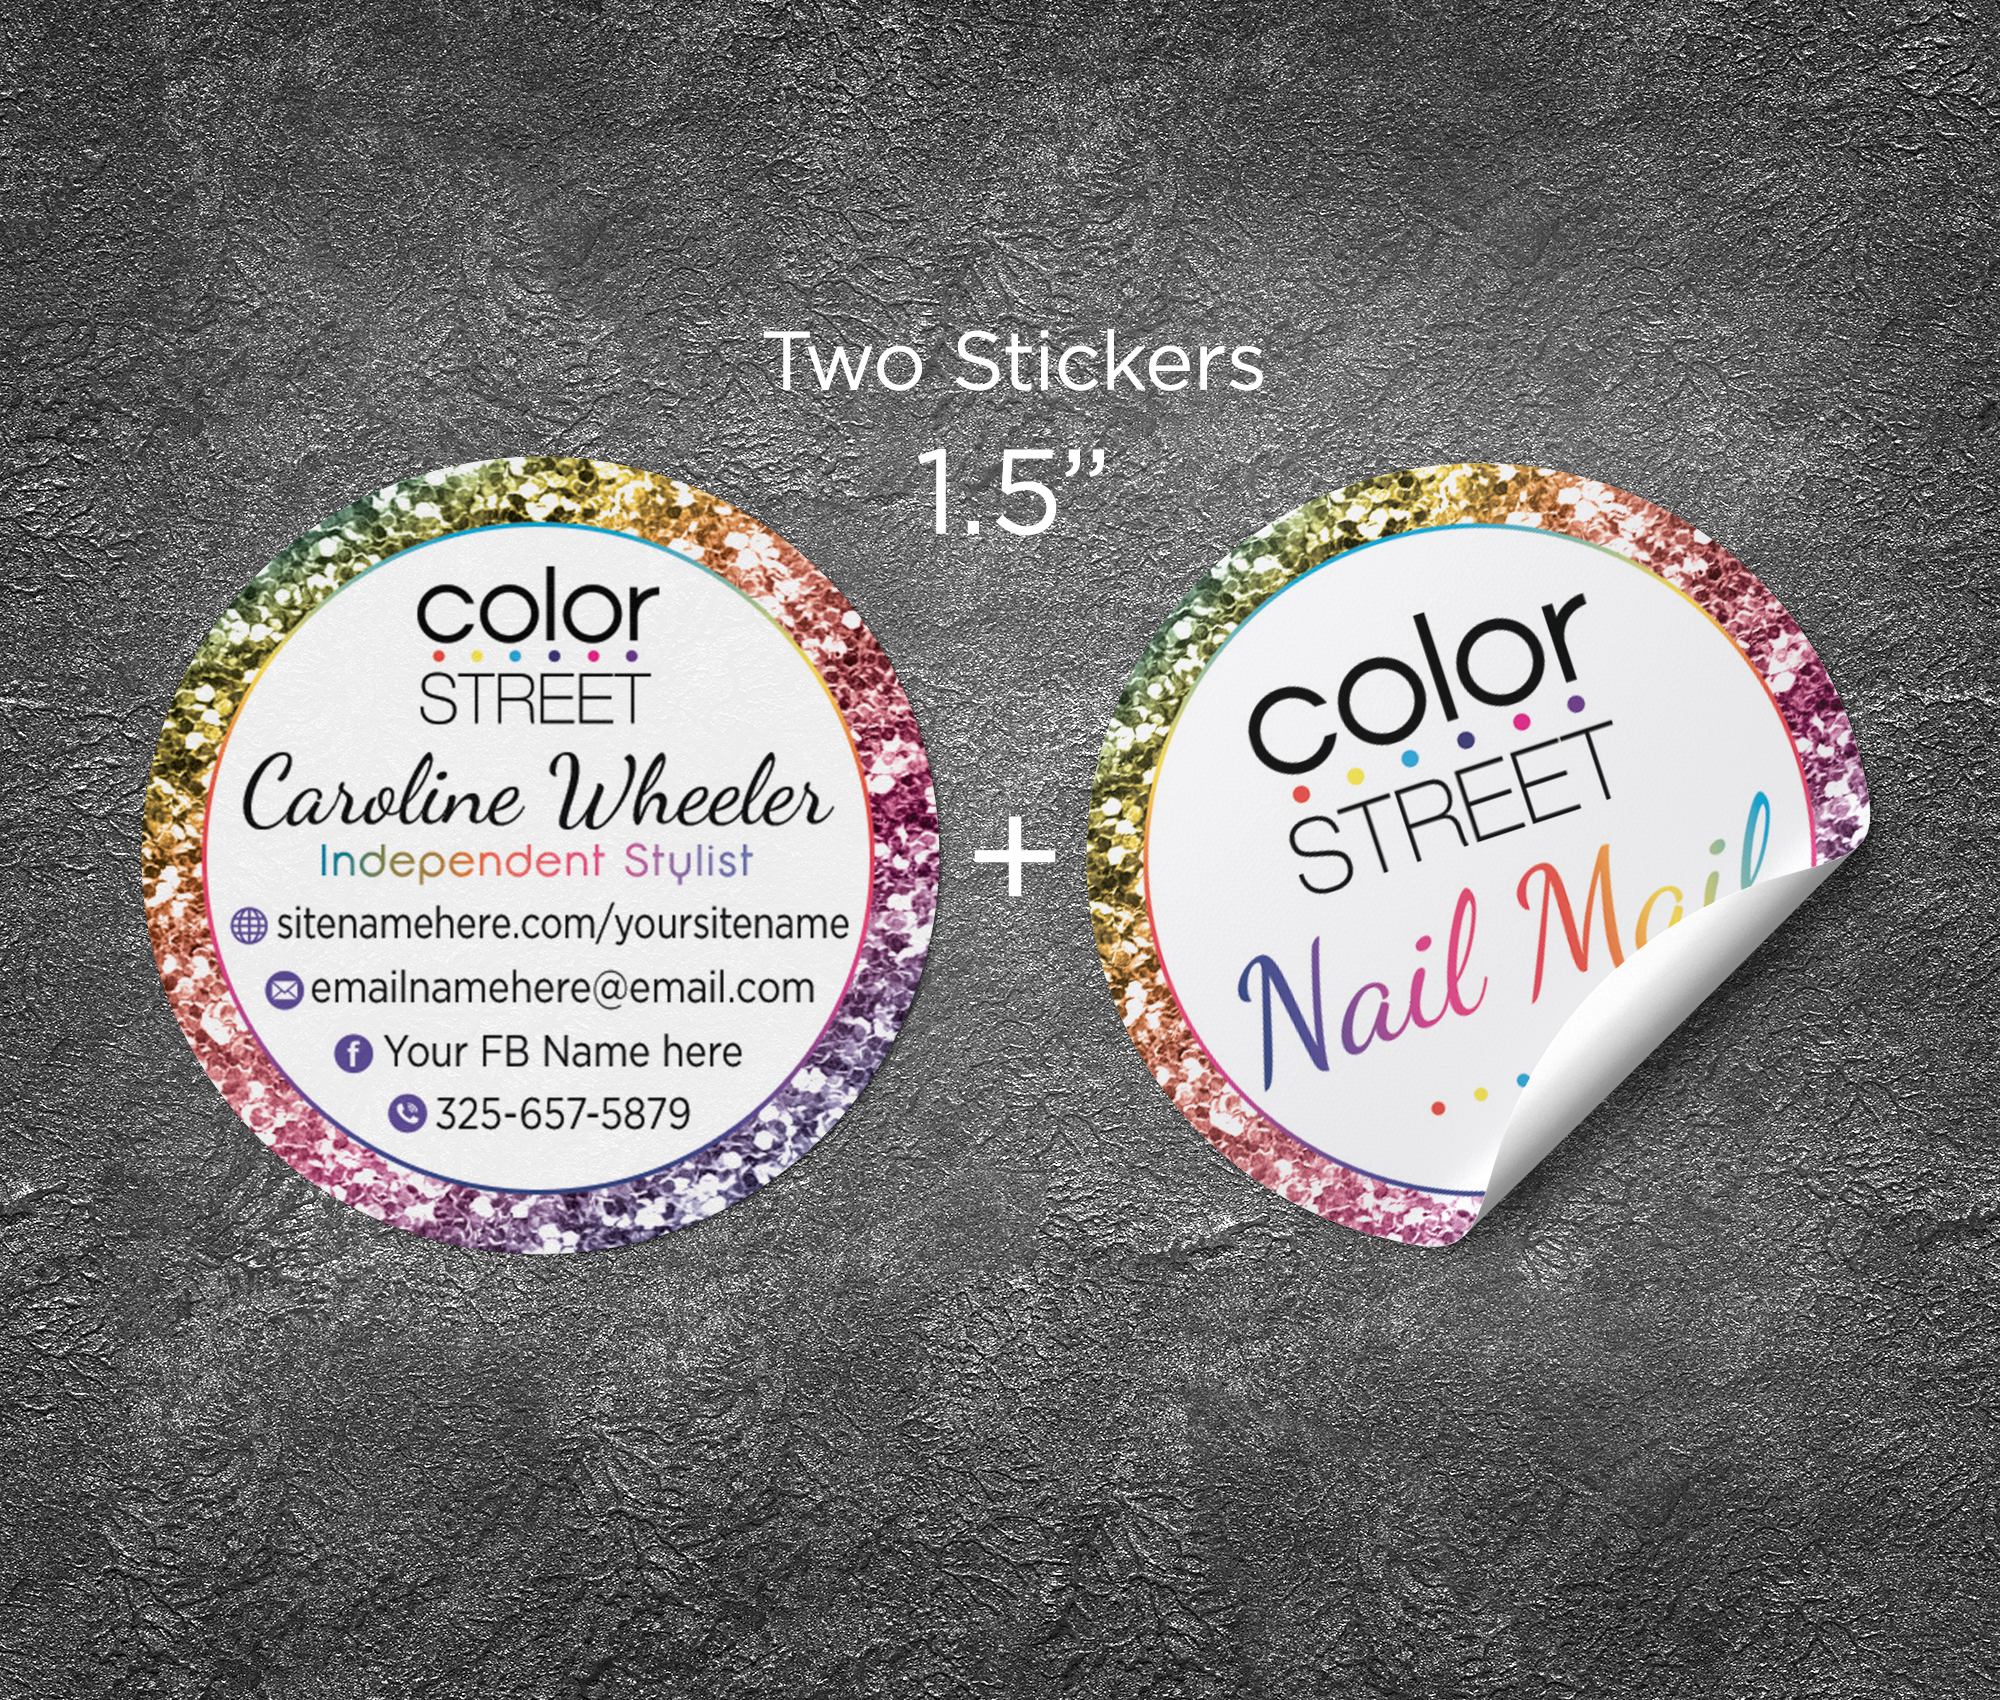 Mail Stickers Qty 24 StripesFlowers L-007 Envelope Seals Personalized Color Street Stickers